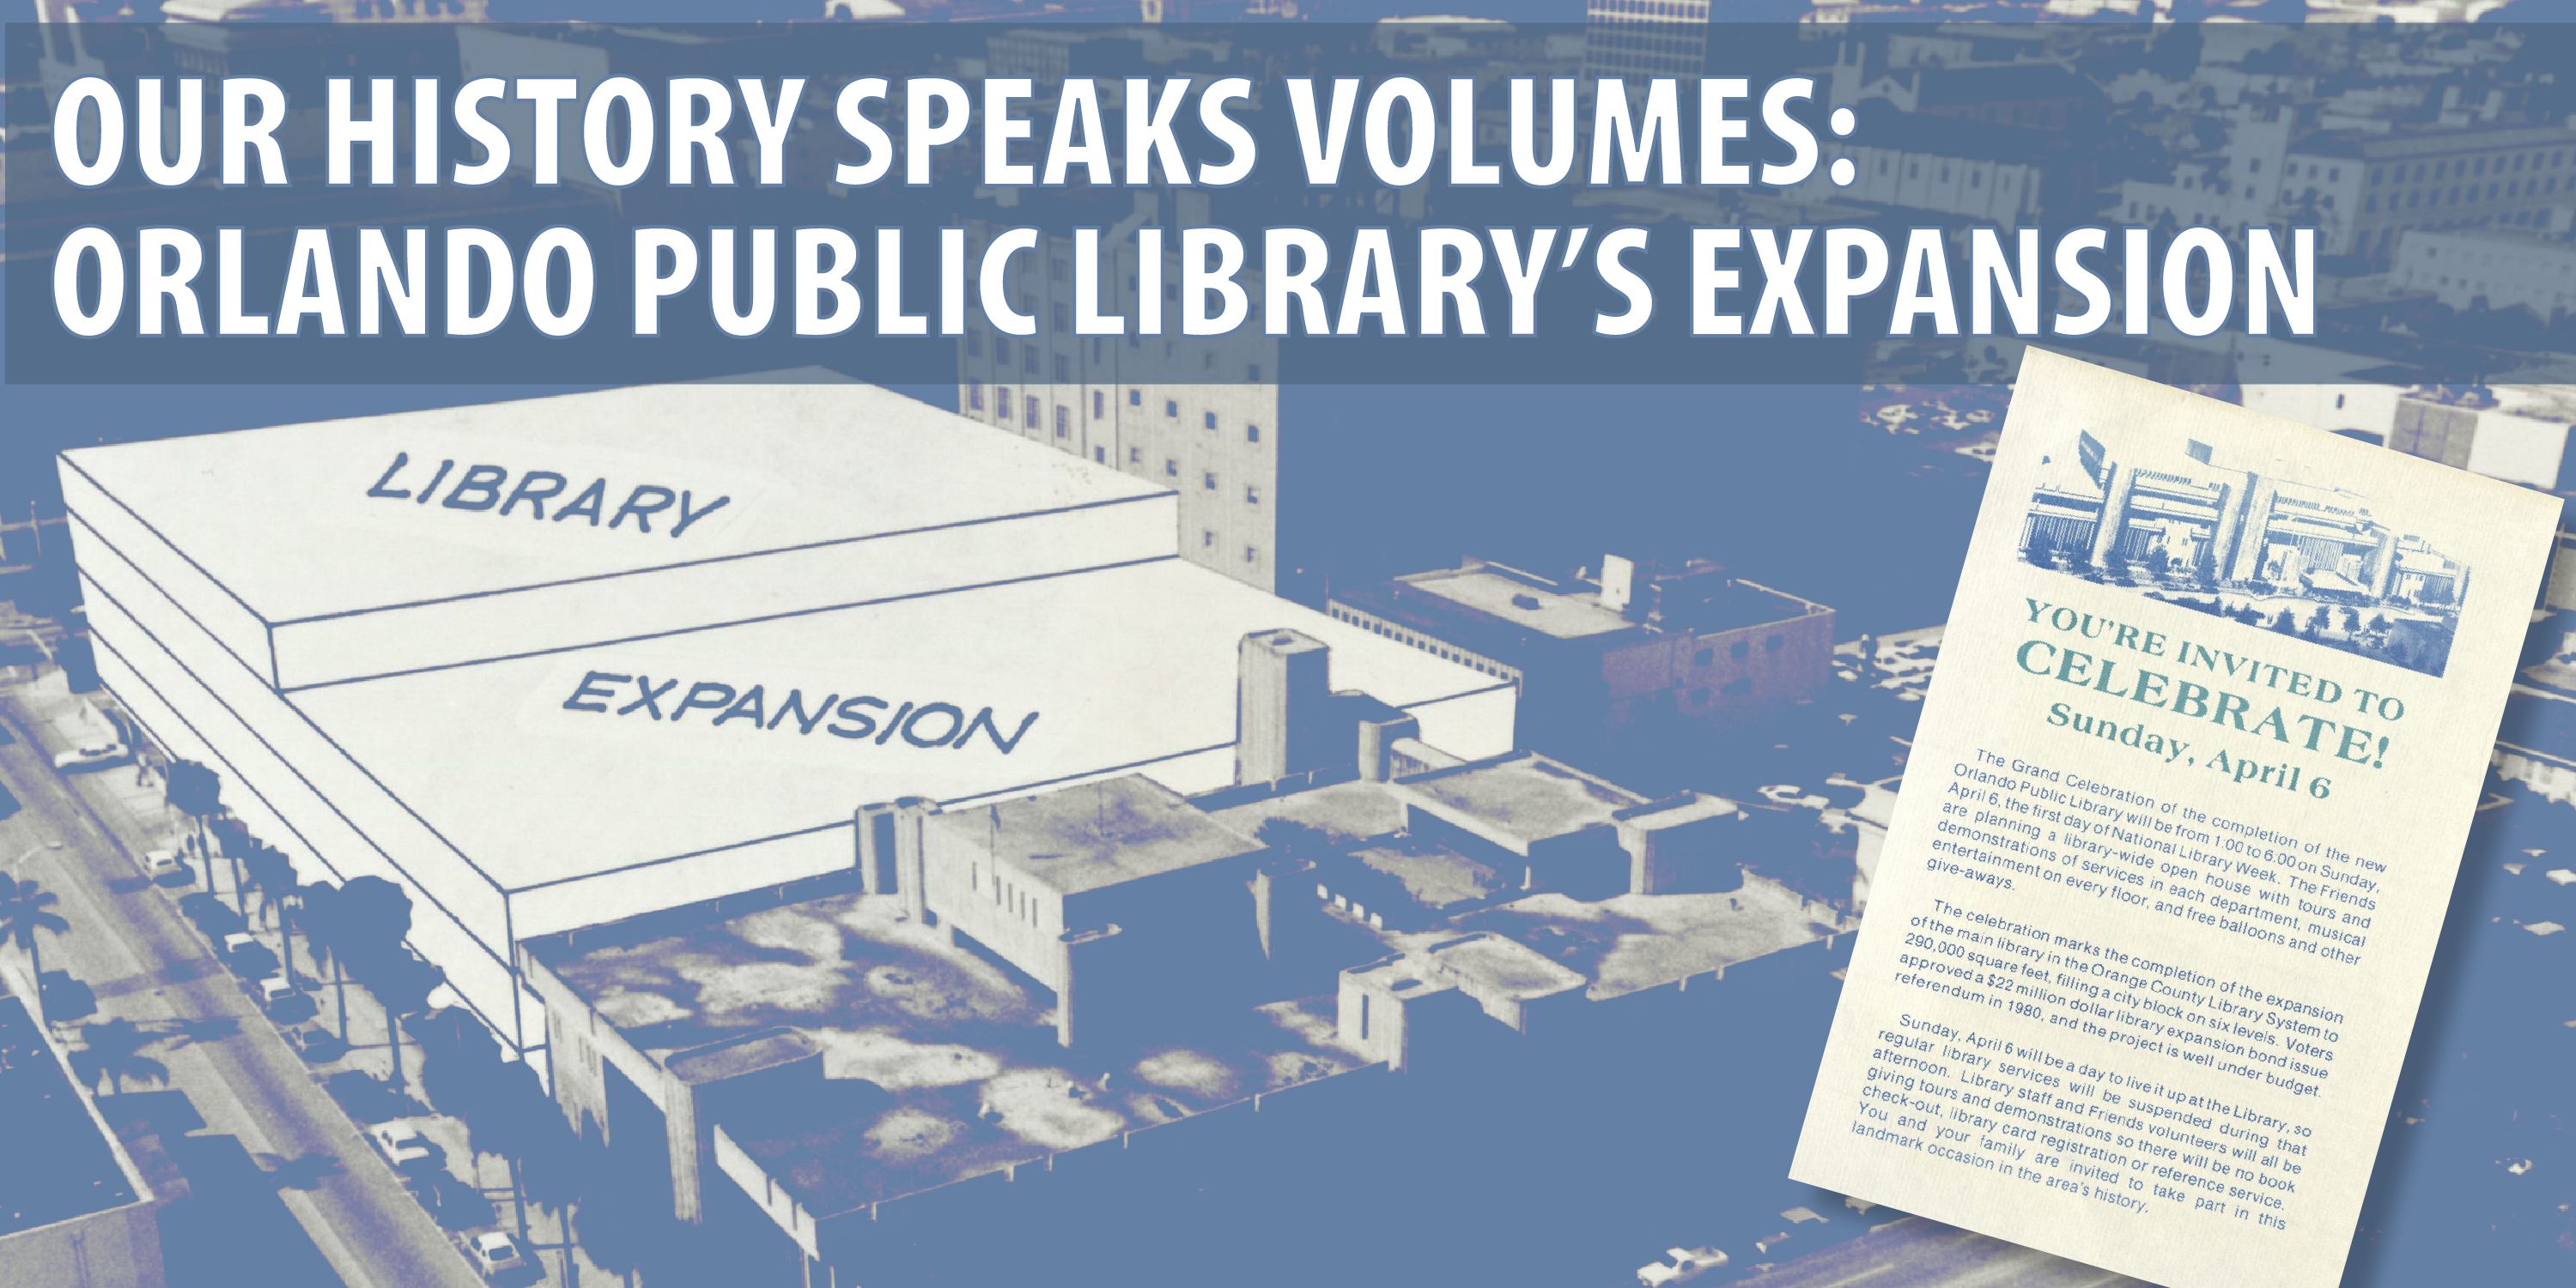 Our History Speaks Volumes: Orlando Public Library’s Expansion